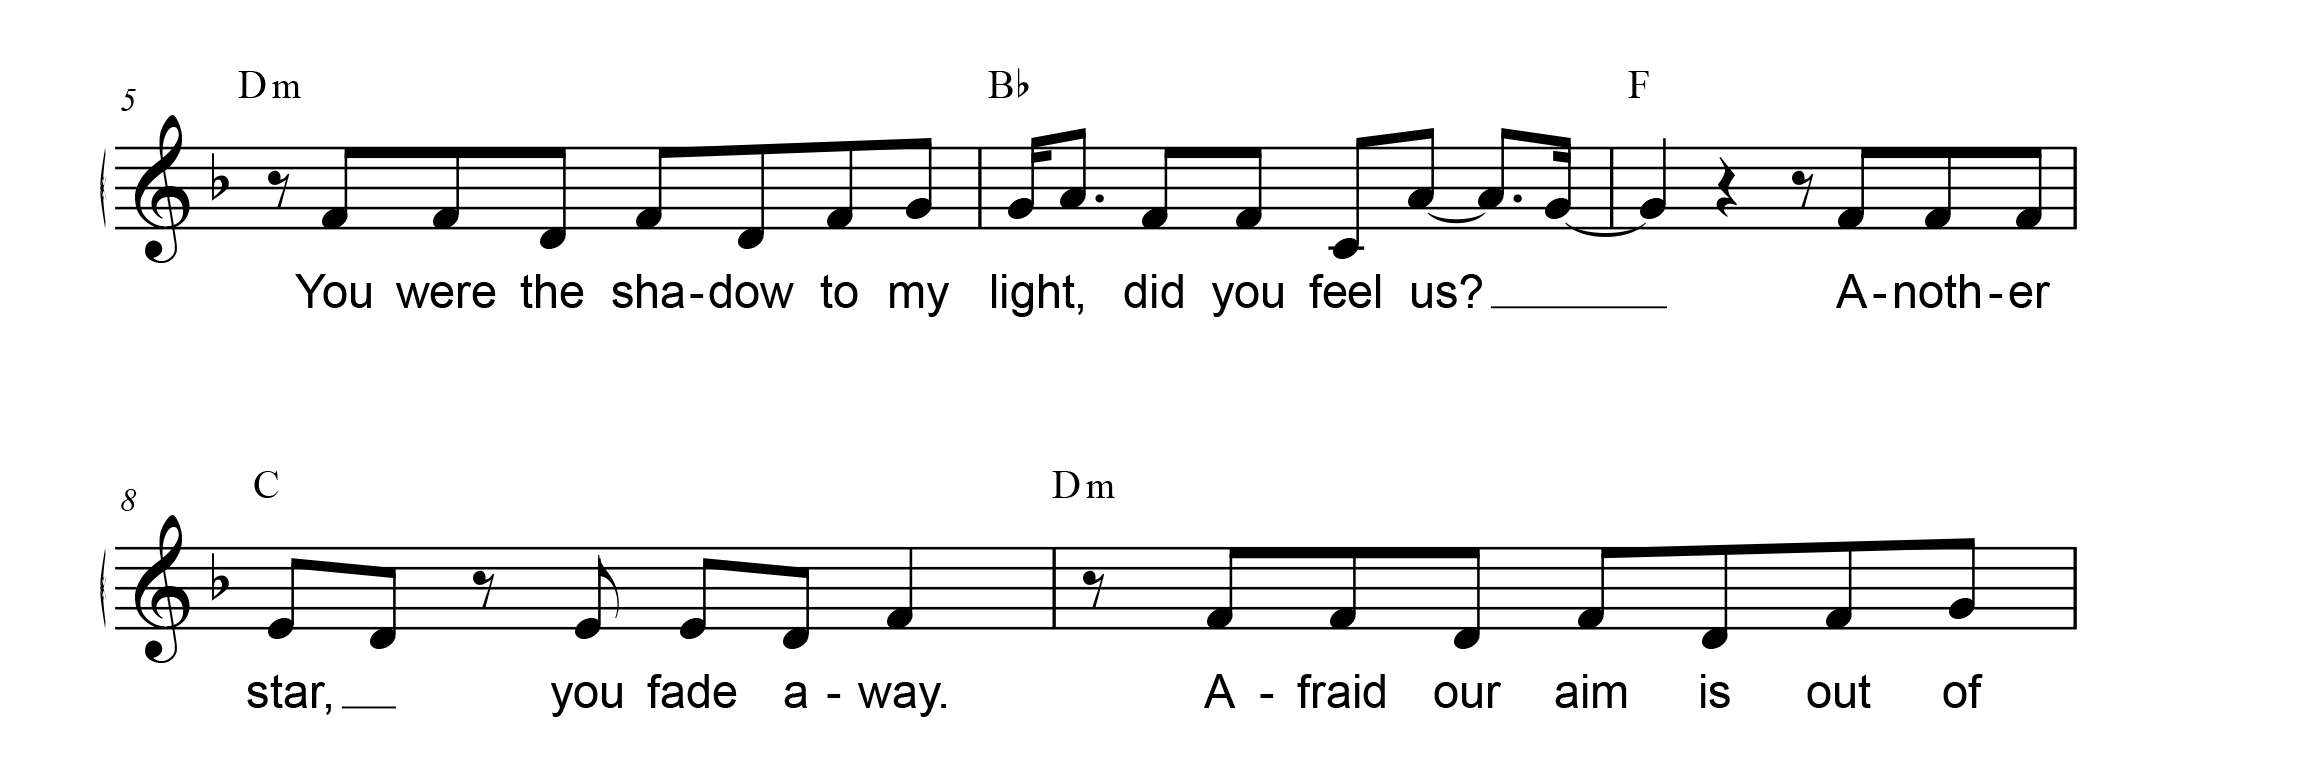 Pop piano songs: lead sheet example - notated melody with. lyrics and chord symbols on top.